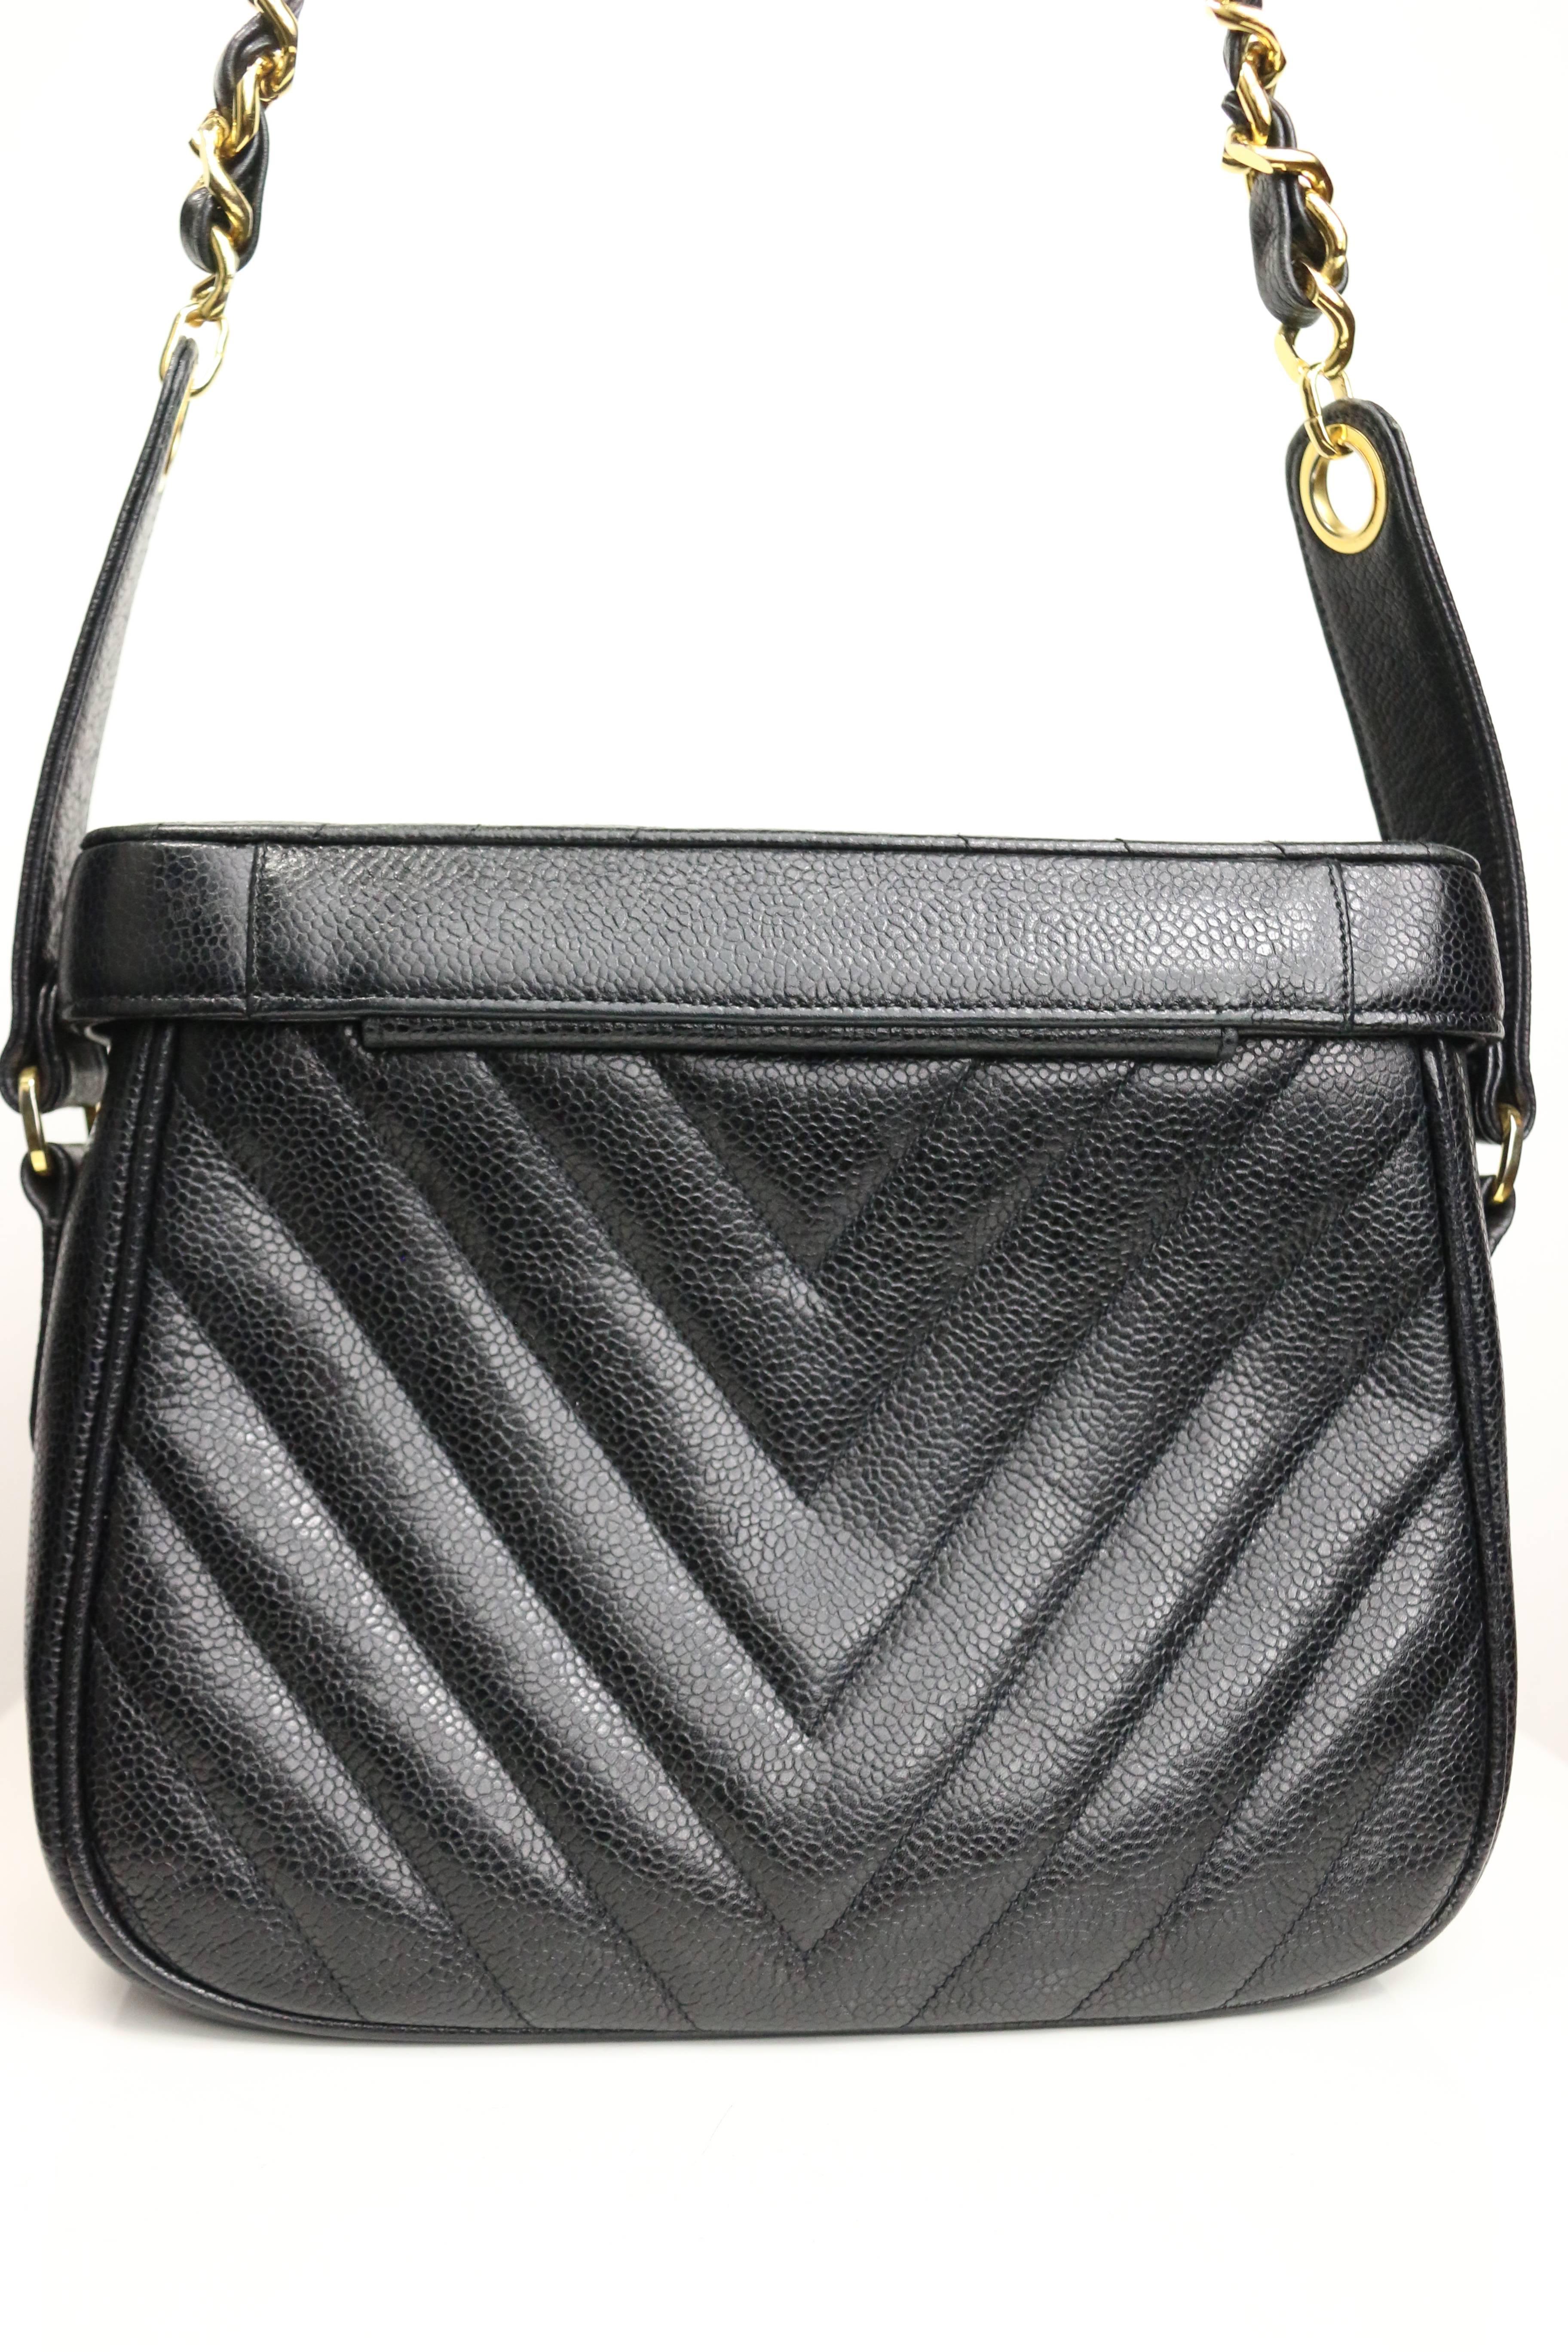 Chanel Black Caviar Leather Chevron Vanity Bag  In Excellent Condition In Sheung Wan, HK